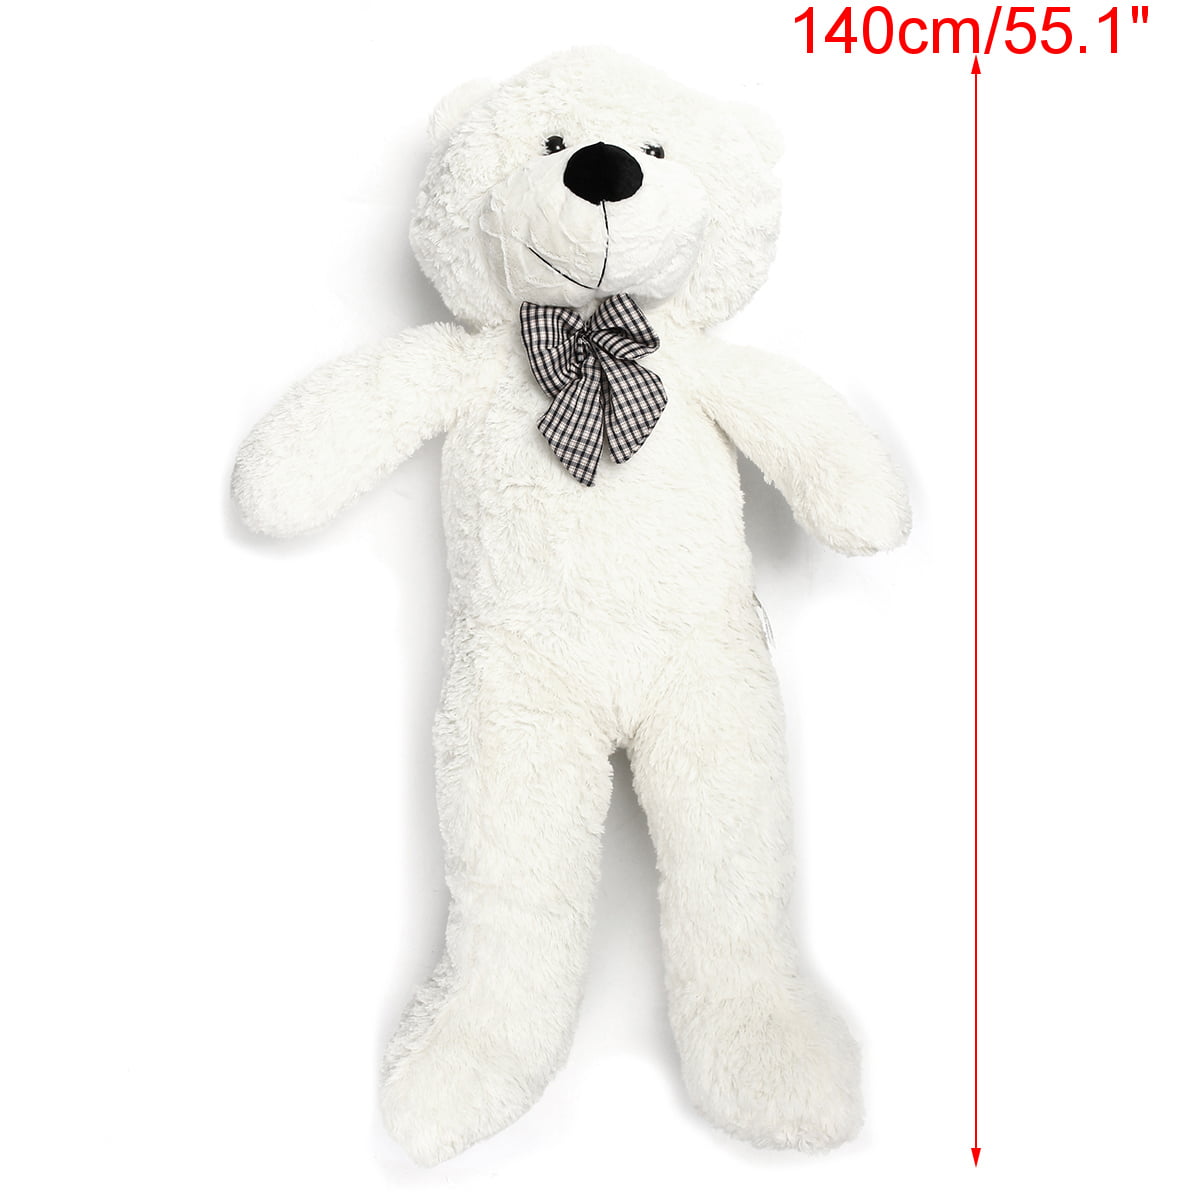 55‘’ Big Teddy Bear White Plush Soft Toys Doll Only Cover Case No Filled Gift US 